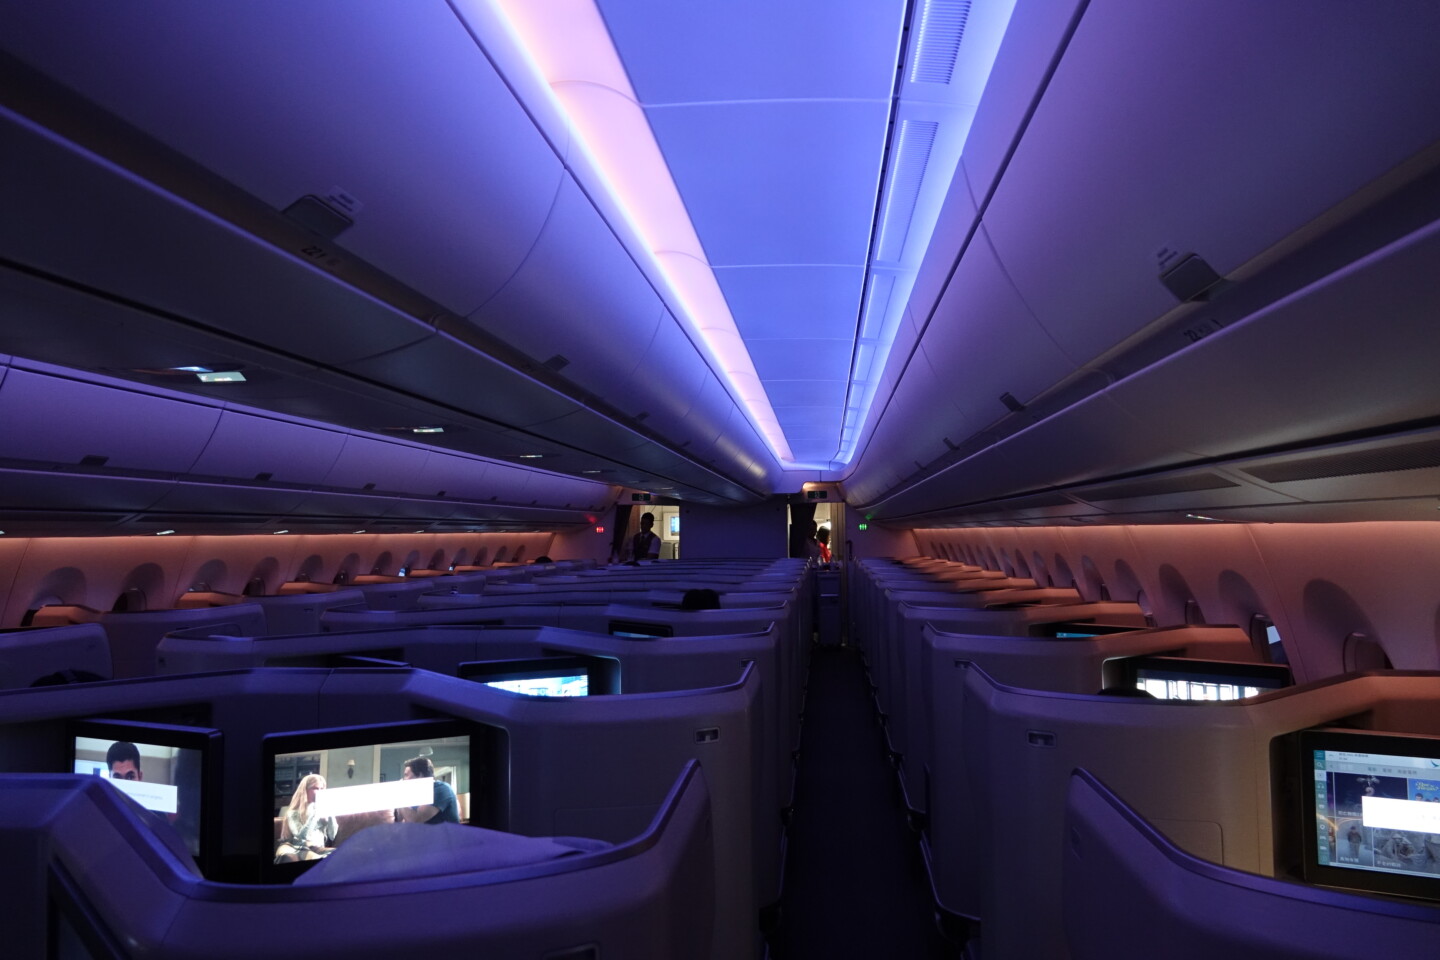 inside an airplane with rows of seats and a person standing in the back